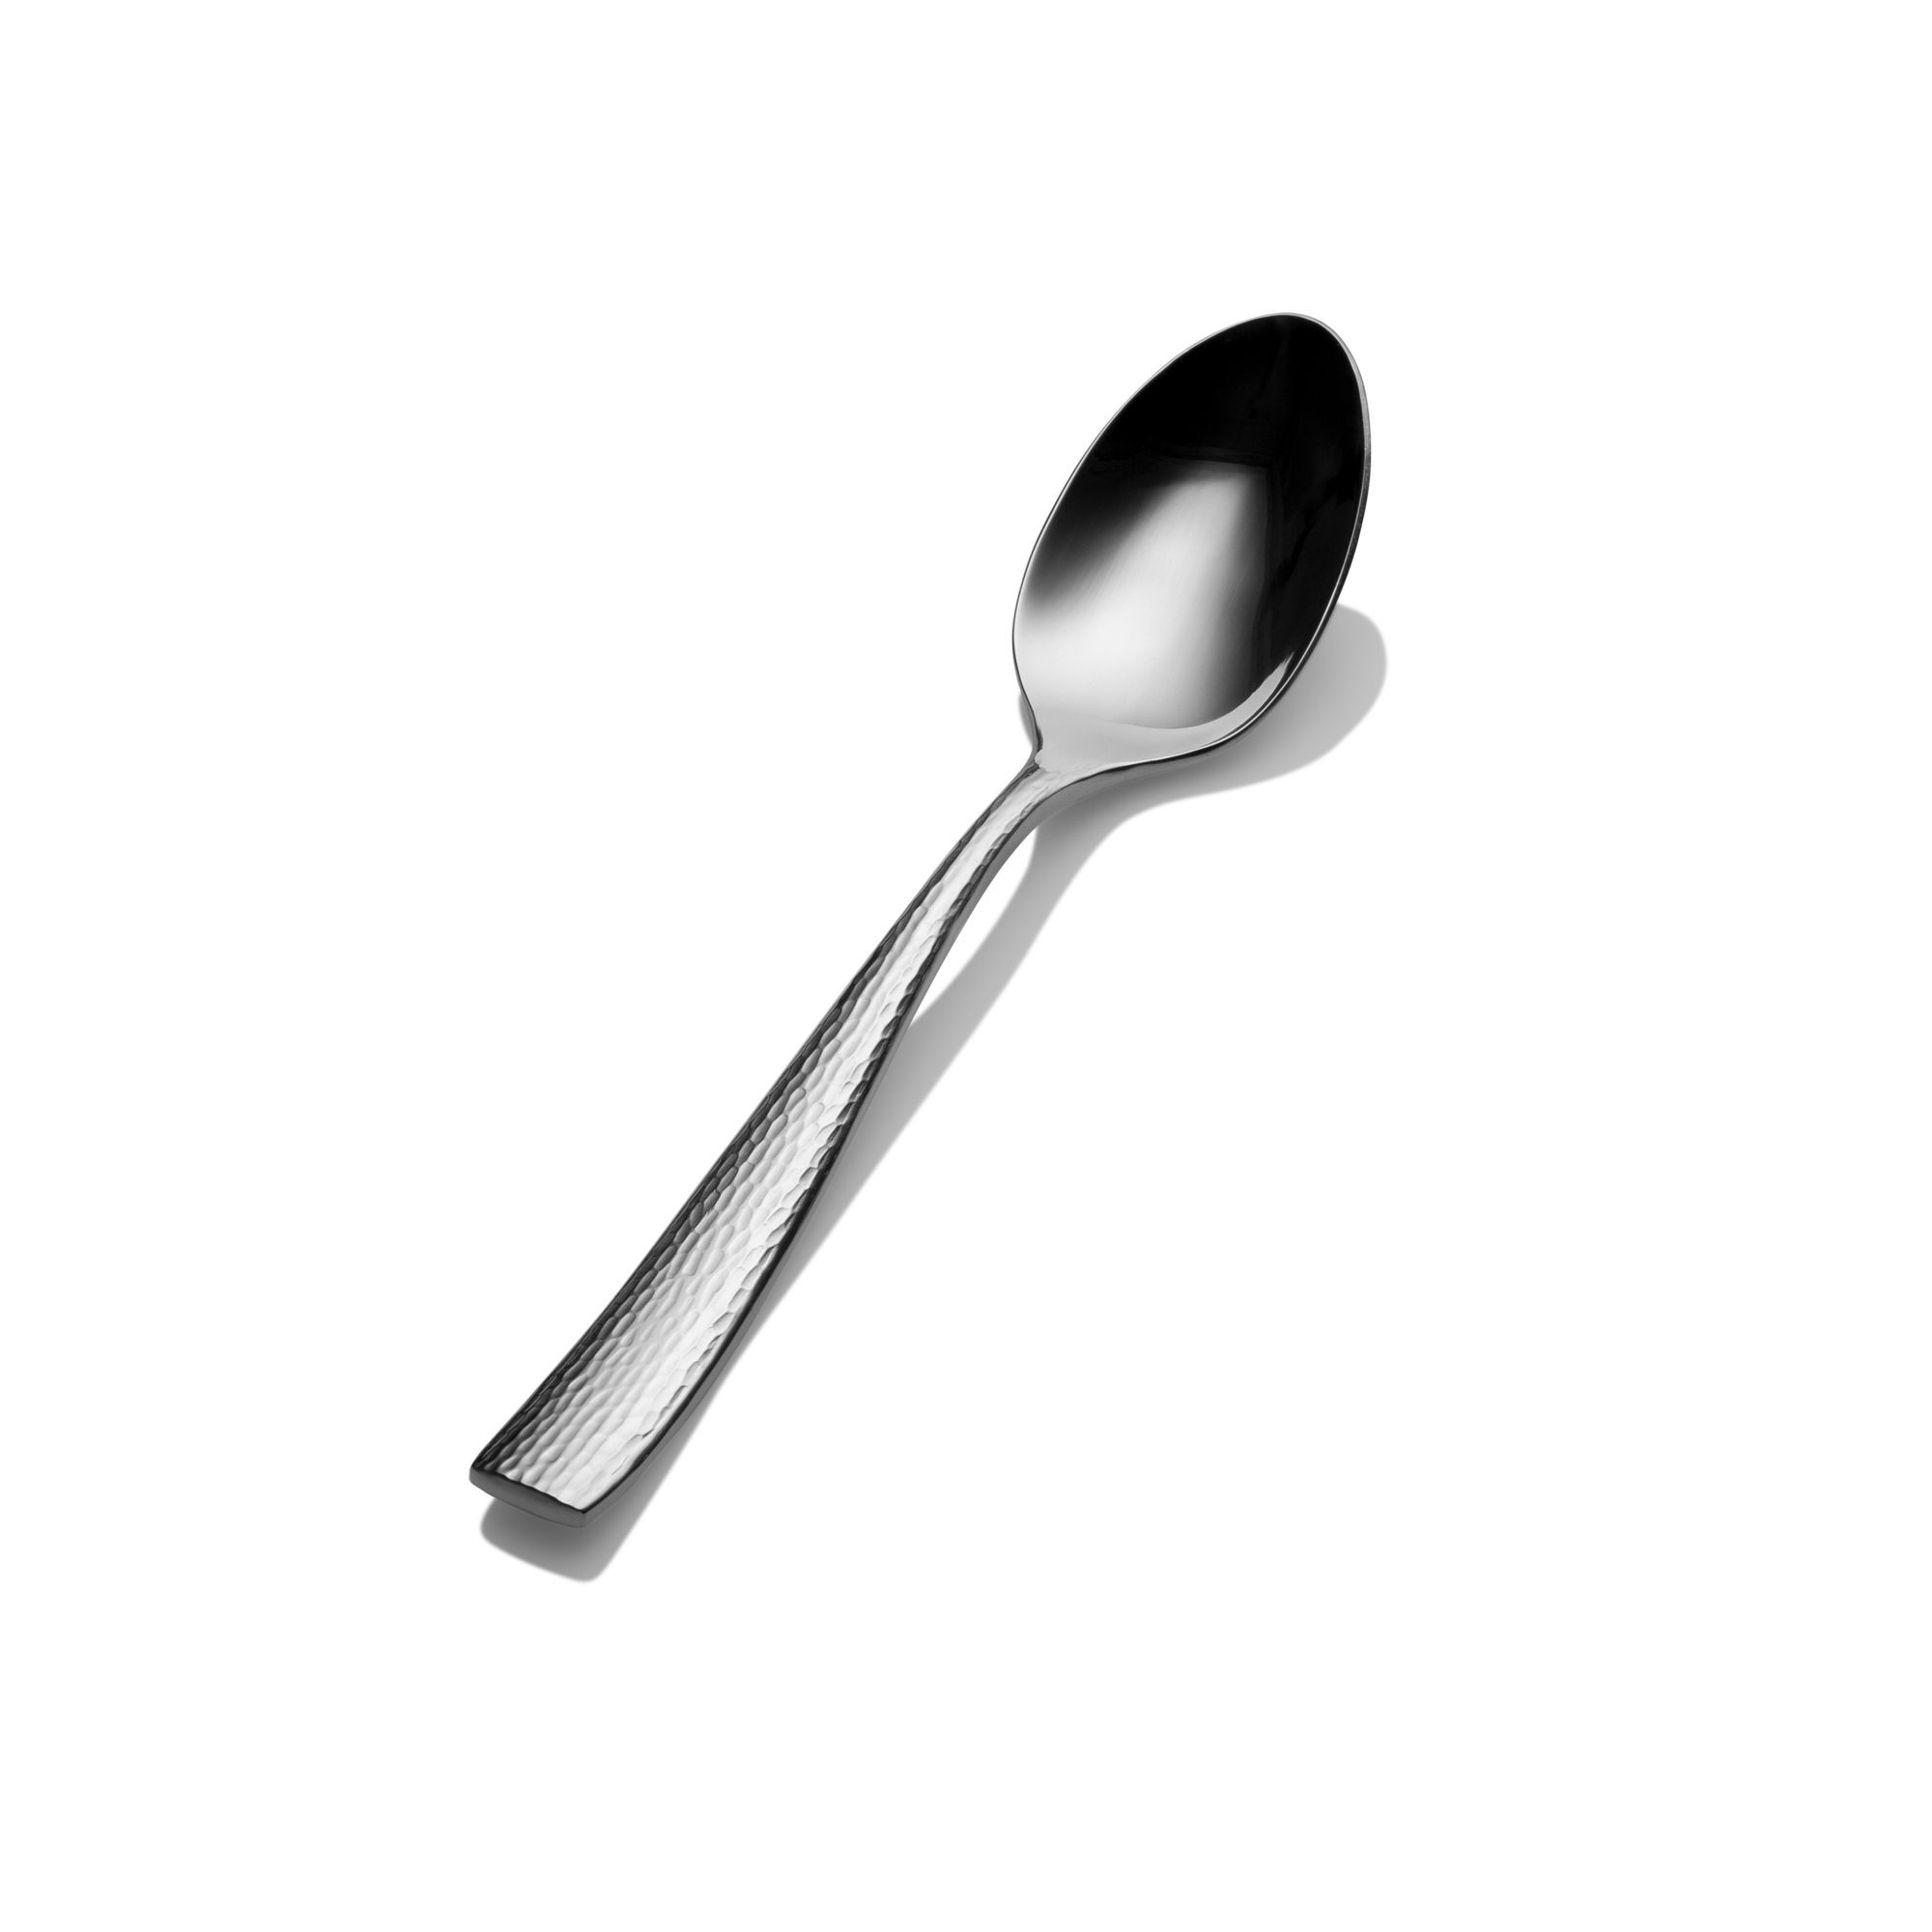 Bon Chef S3903 Scarlett 18/8 Stainless Steel Soup and Dessert Spoon